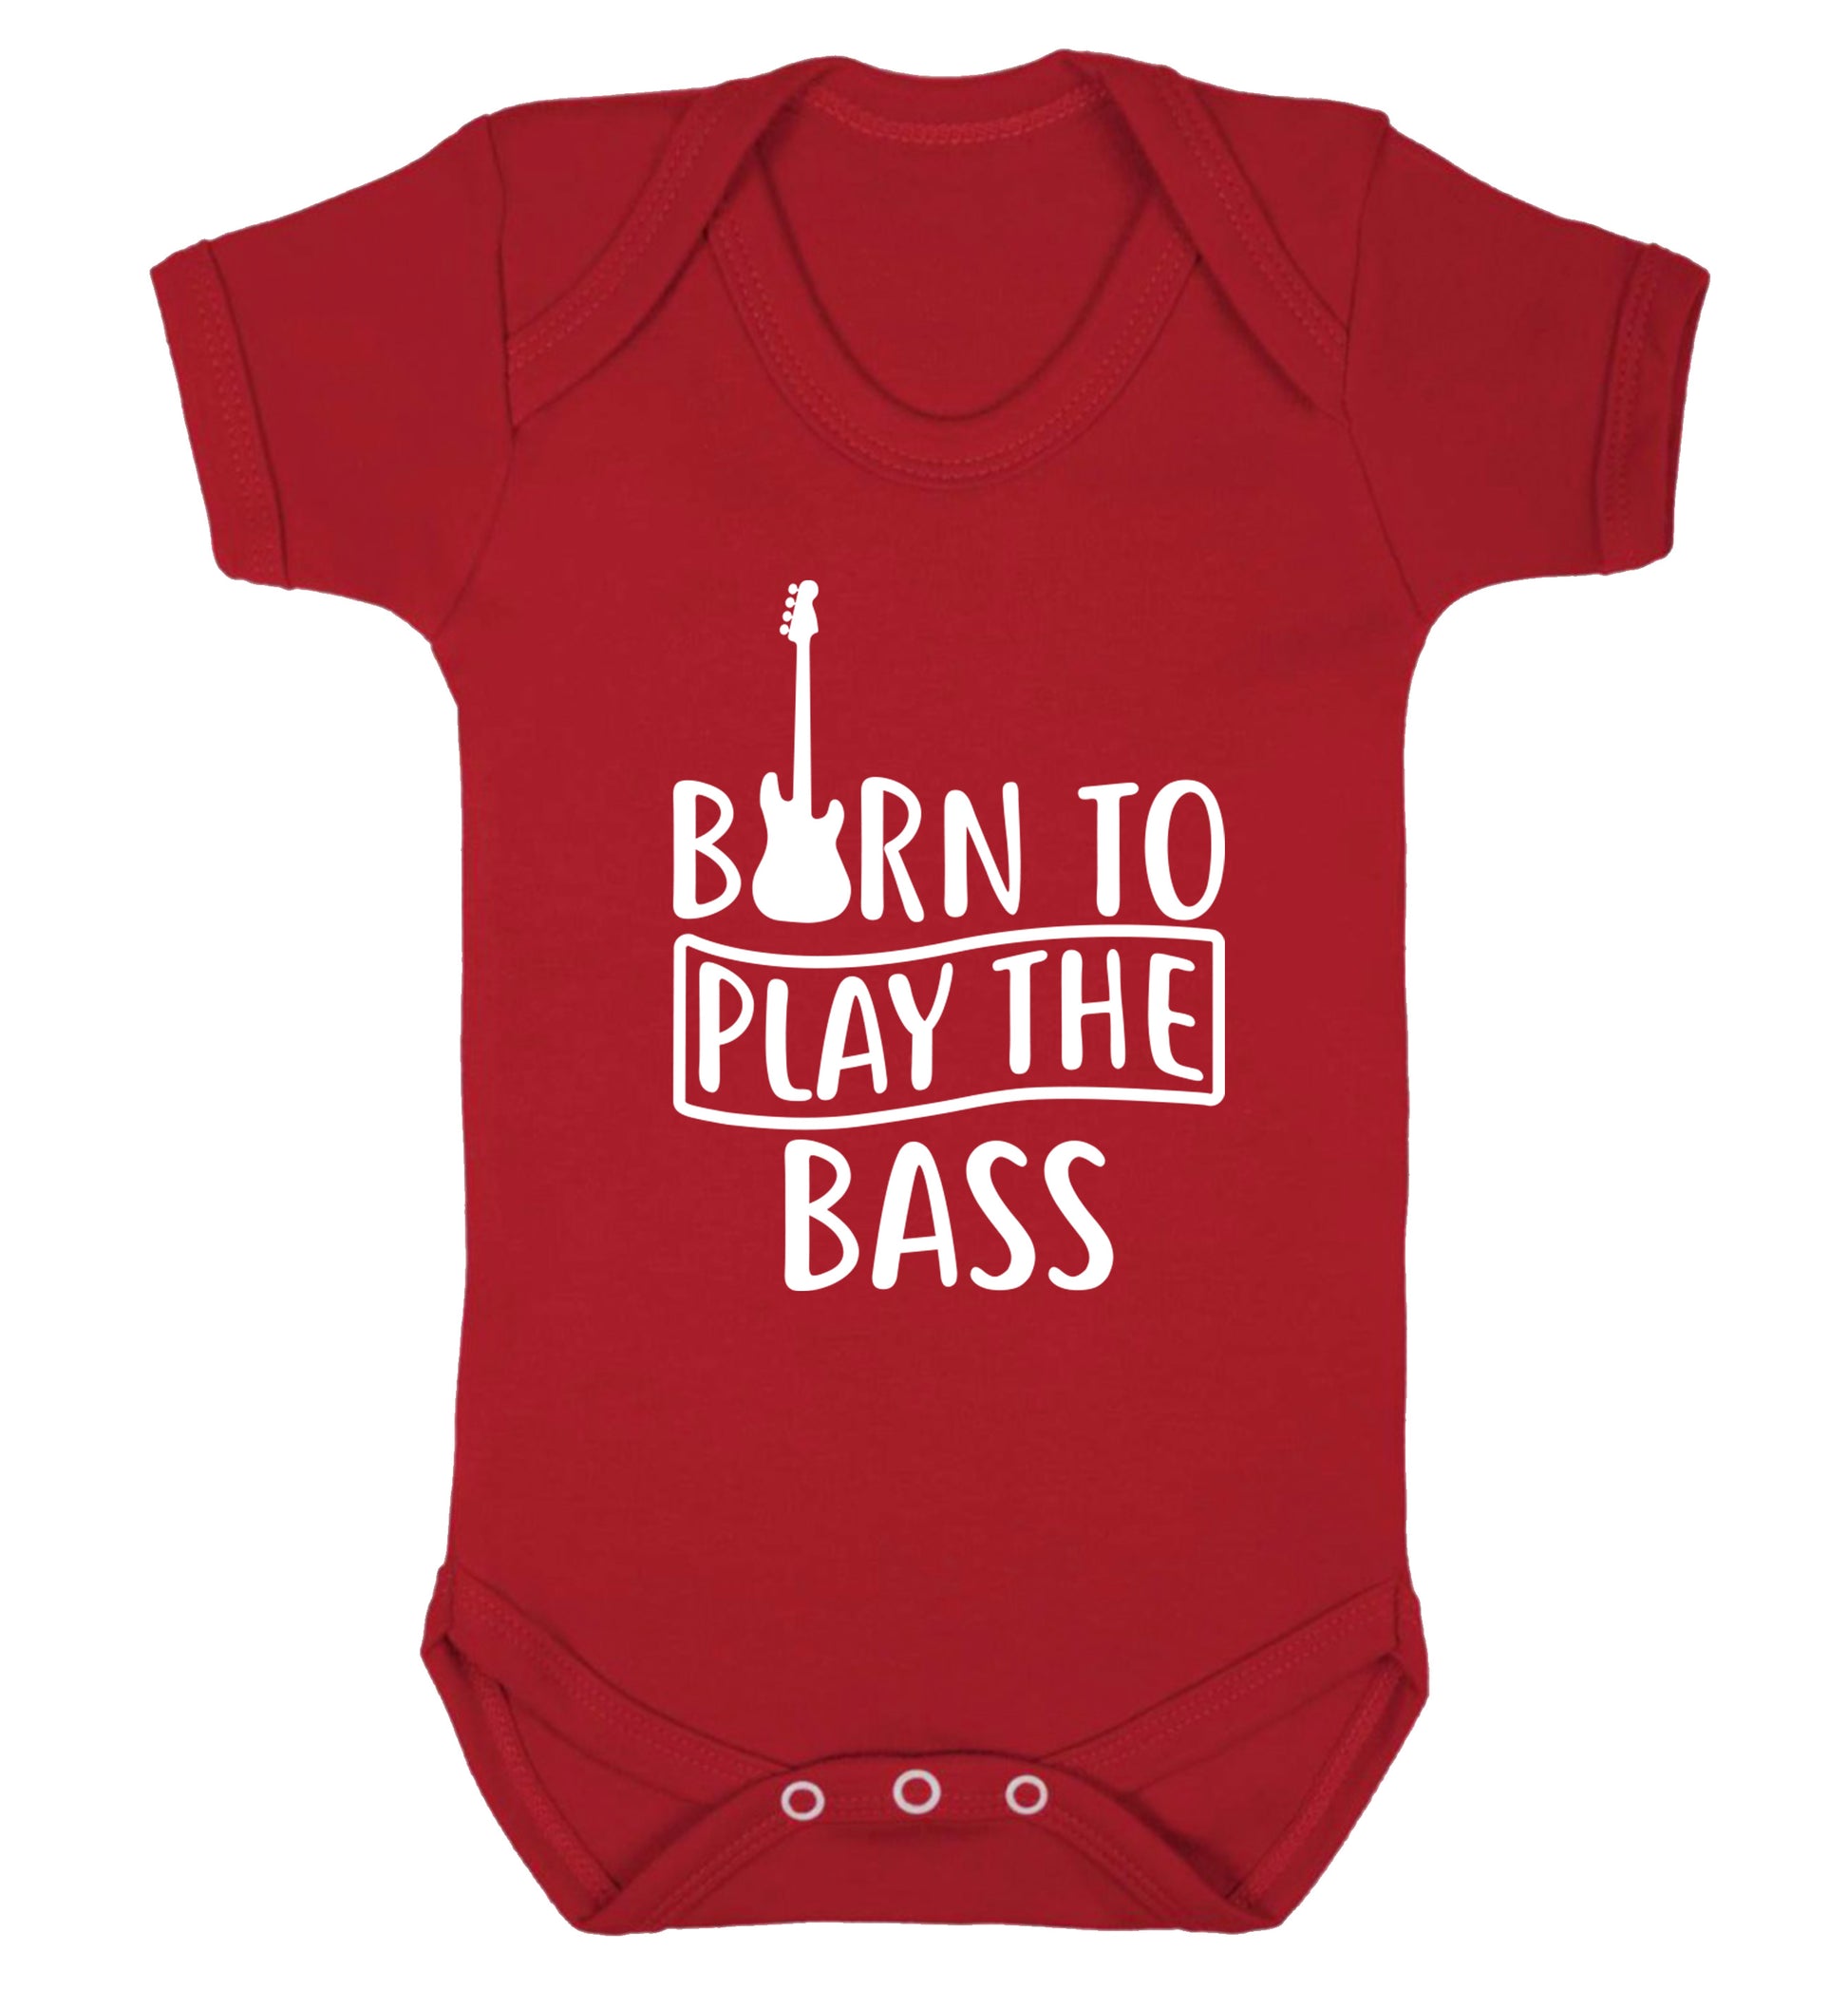 Born to play the bass Baby Vest red 18-24 months